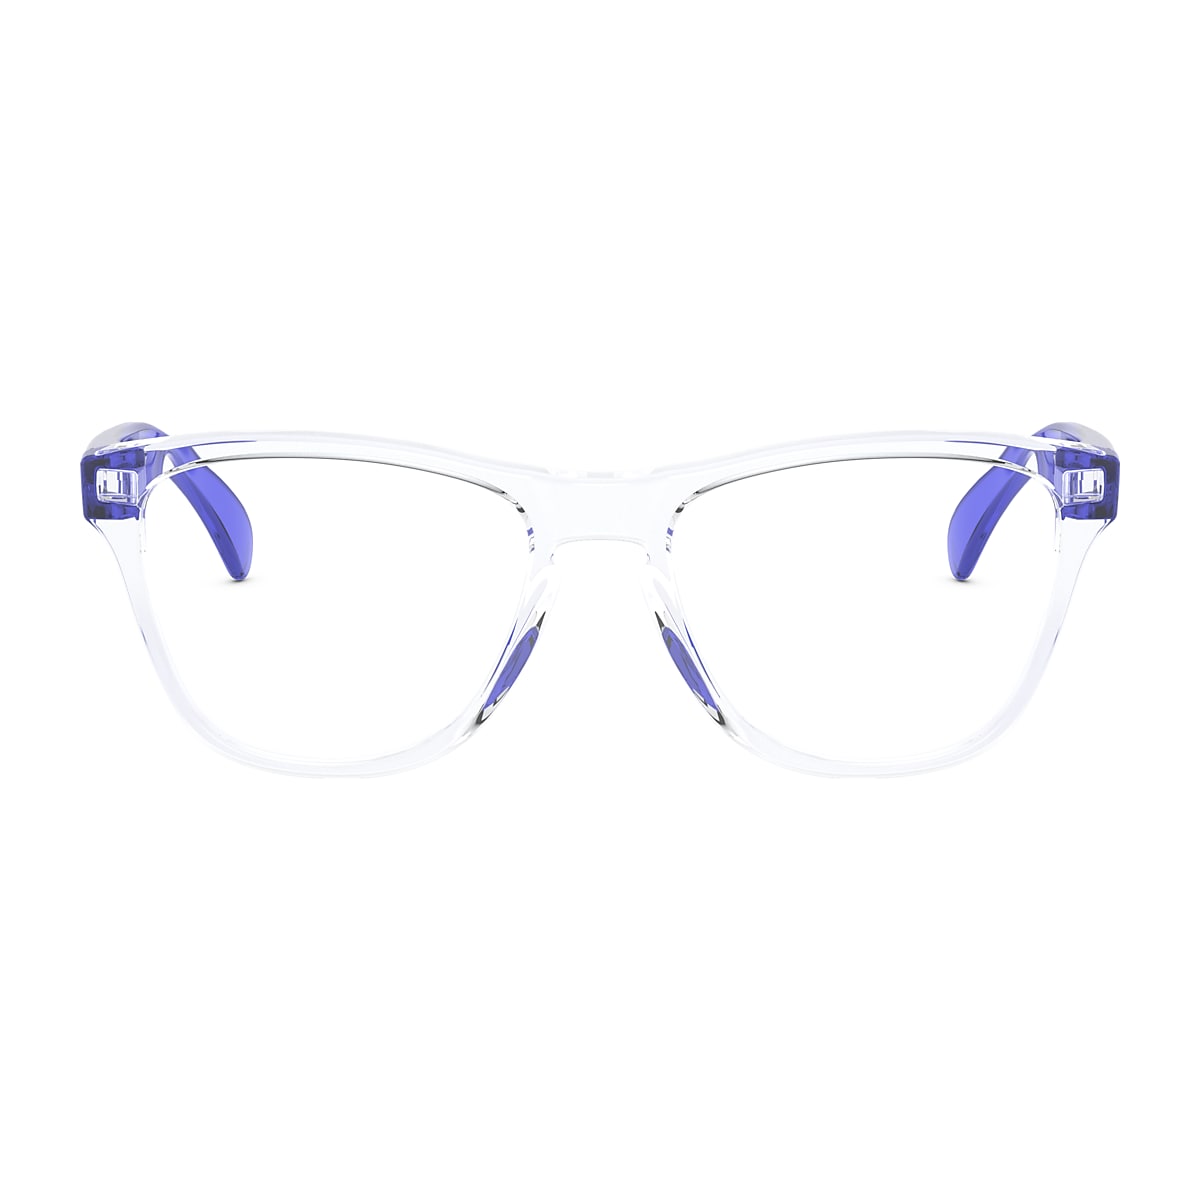 Frogskins™ XS (Youth - Low Bridge Fit) Polished Clear Eyeglasses